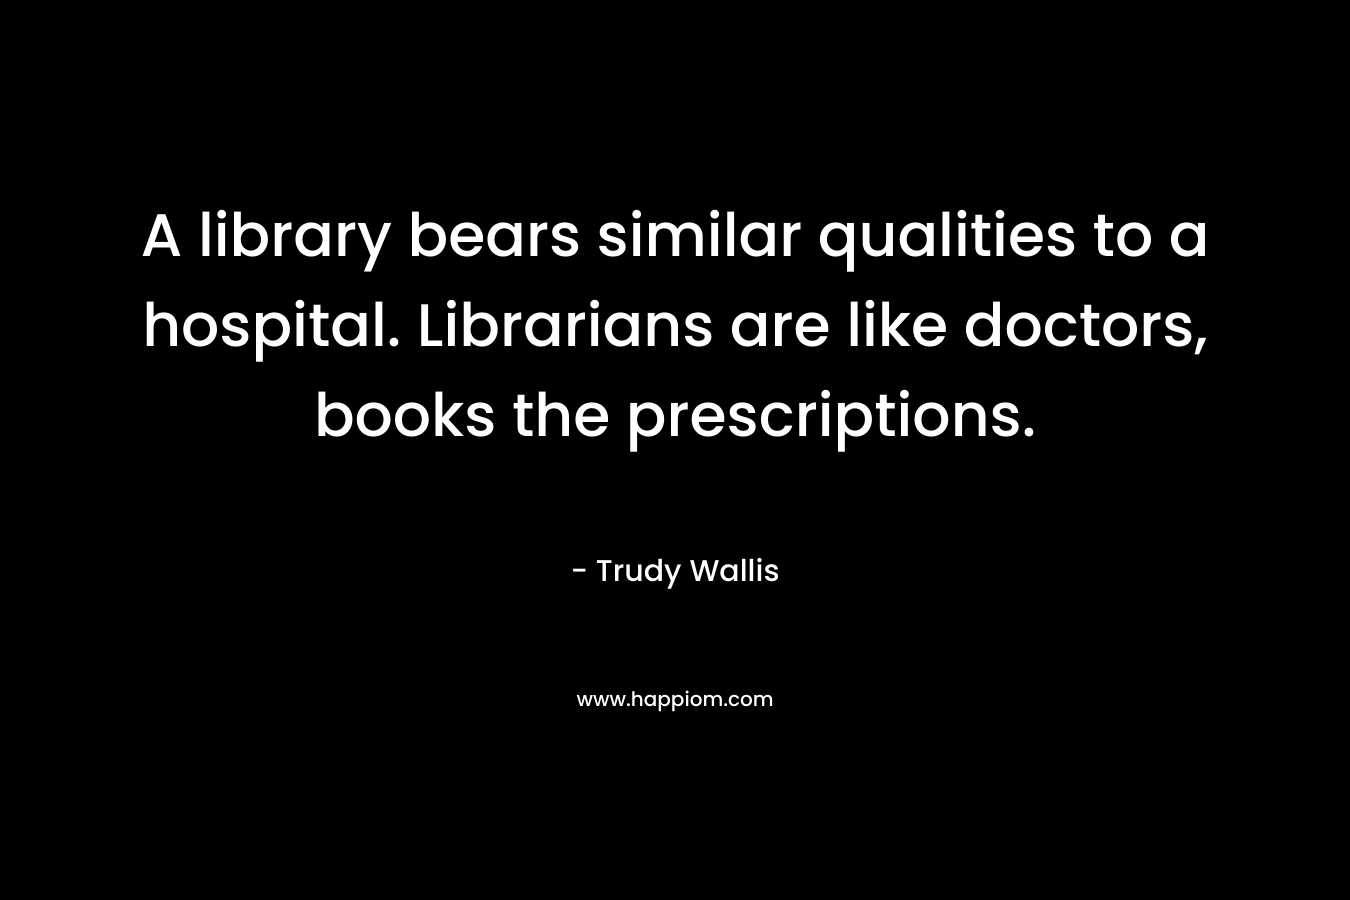 A library bears similar qualities to a hospital. Librarians are like doctors, books the prescriptions.